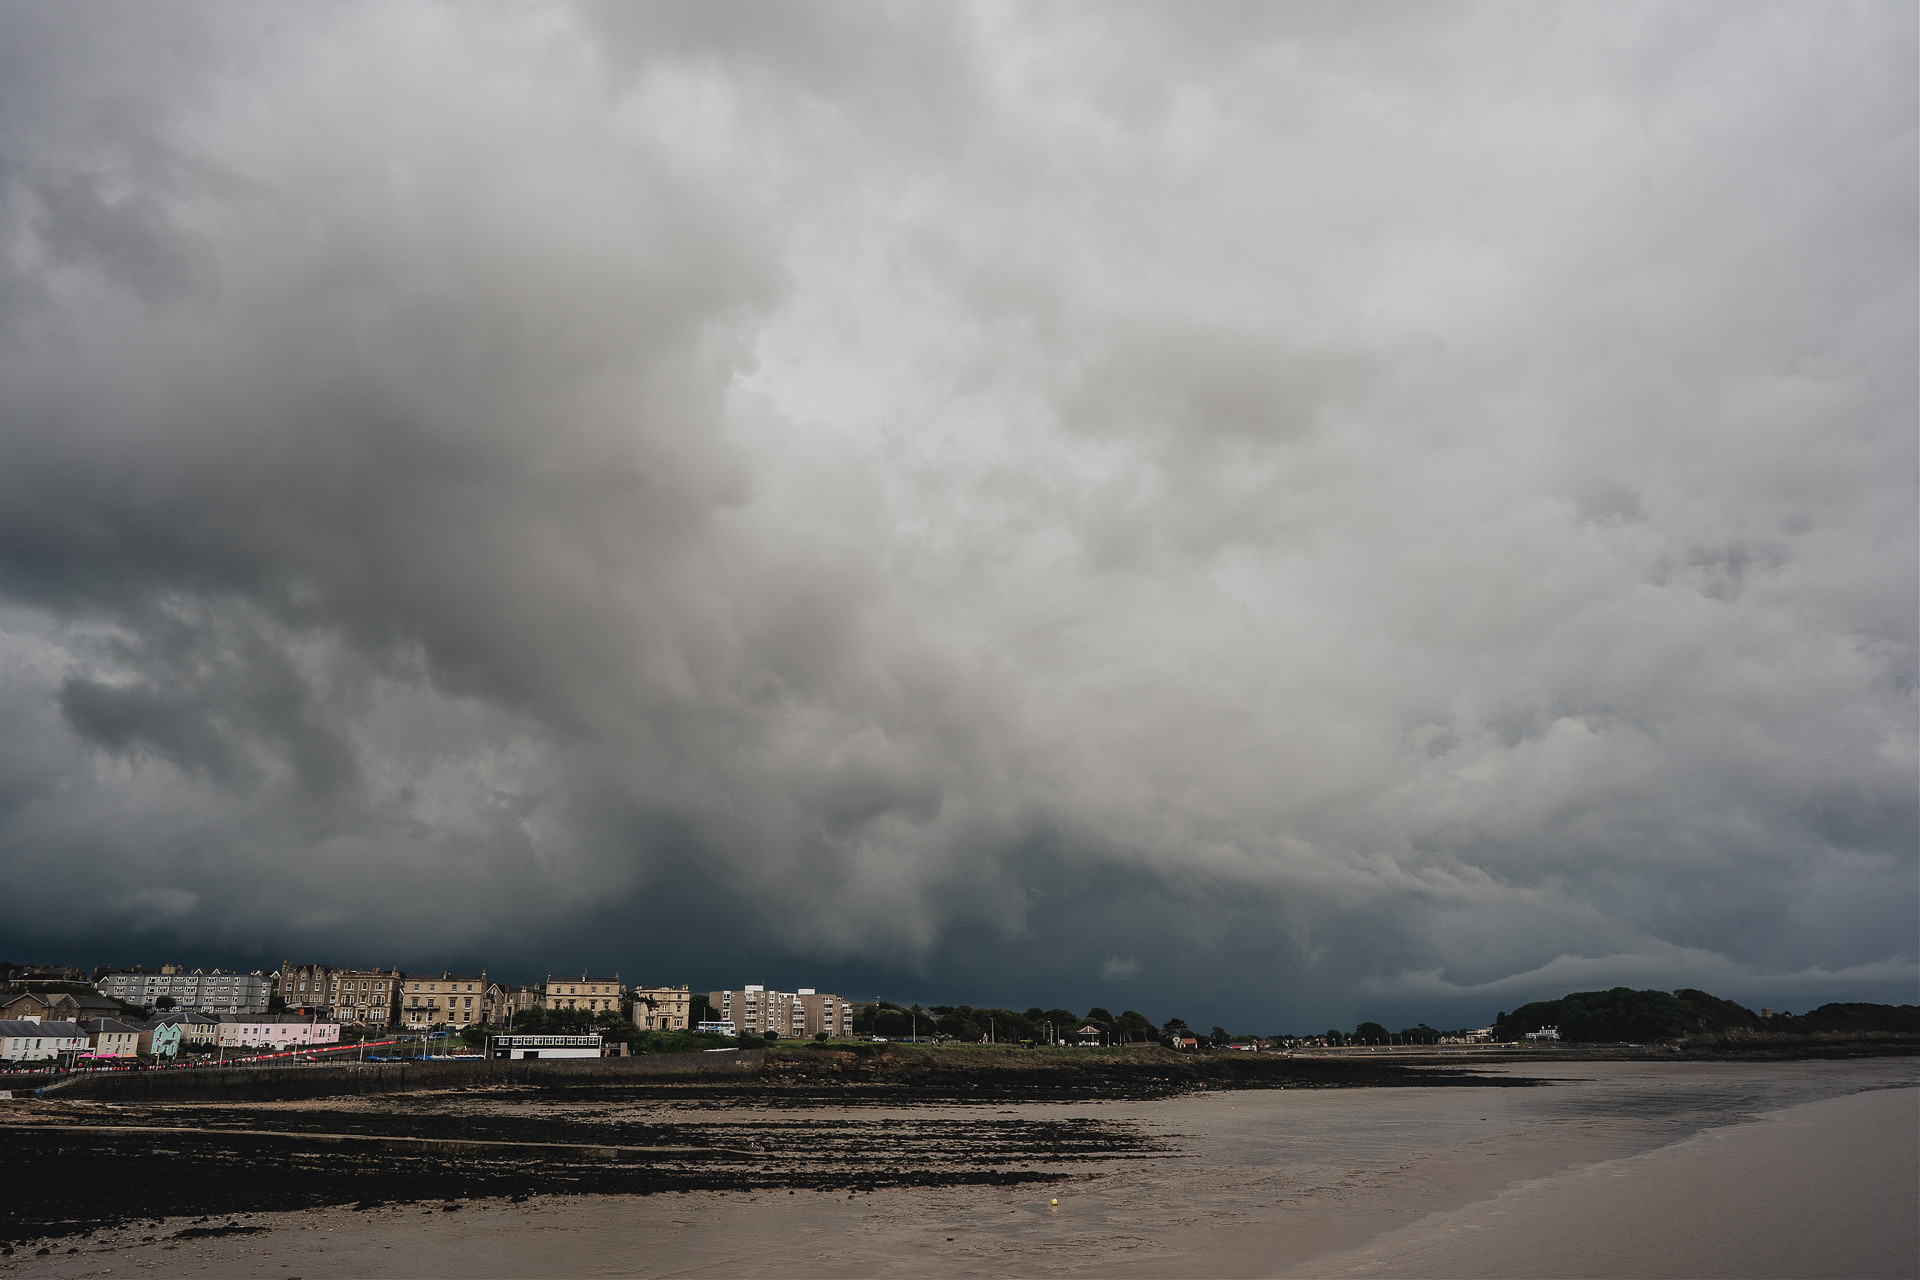 Ominous dark clouds over Clevedon